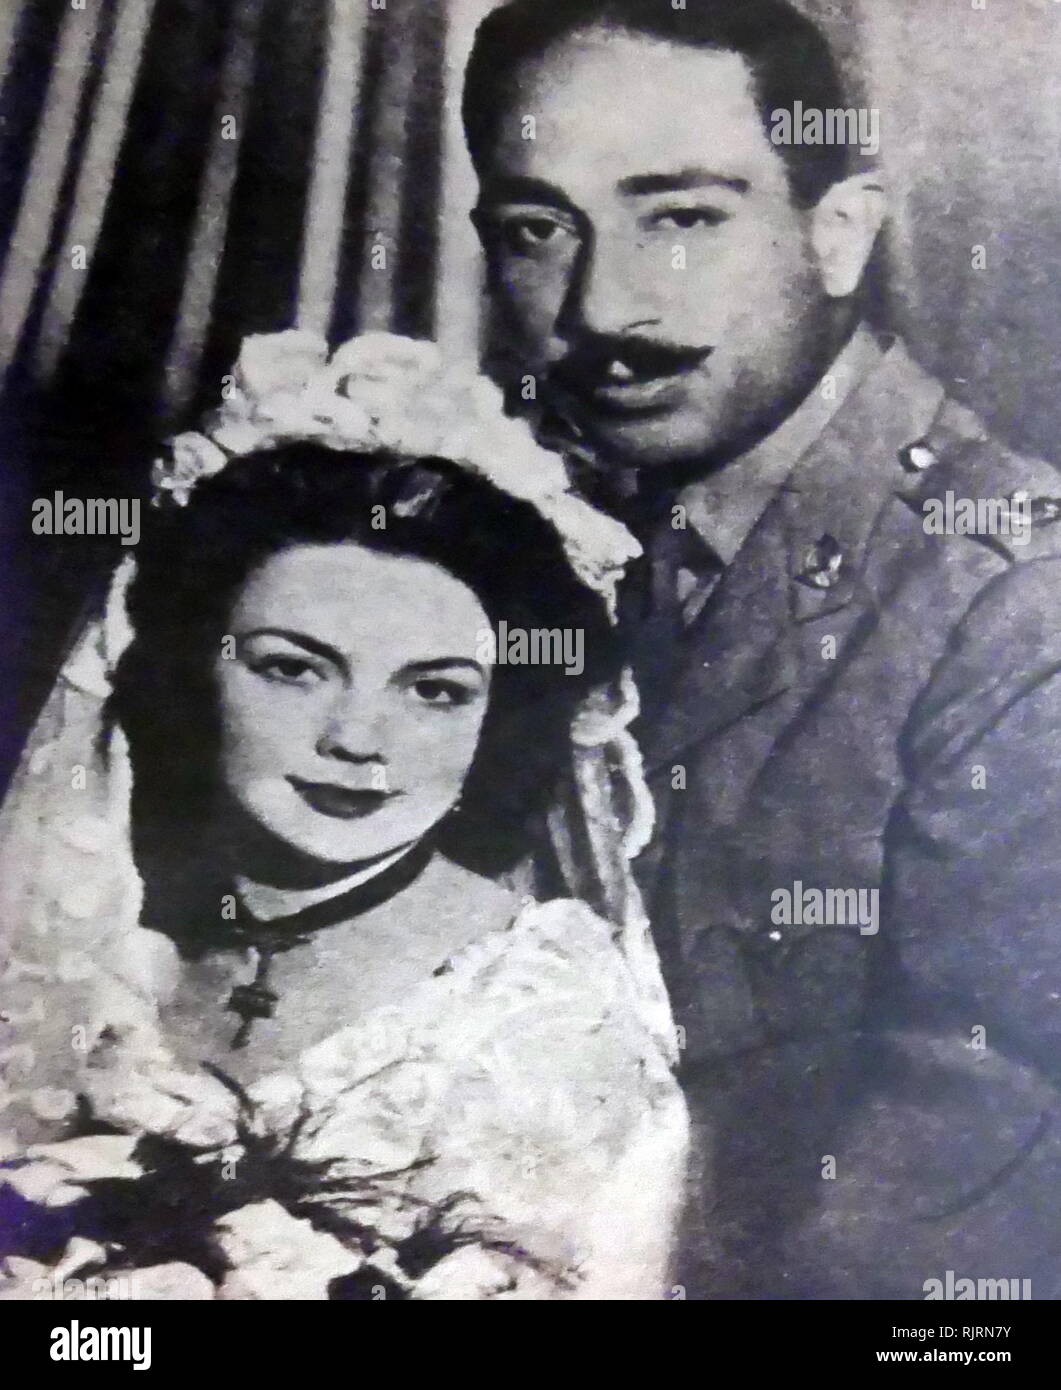 Marriage of Jehan and Anwar Sadat, 1949. Muhammad Anwar el-Sadat (1918 - 1981), President of Egypt, serving from 15 October 1970 until his assassination by fundamentalist army officers on 6 October 1981. Sadat was a senior member of the Free Officers who overthrew King Farouk in the Egyptian Revolution of 1952, and a close confidant of President Gamal Abdel Nasser, under whom he served as Vice President twice and whom he succeeded as President in 1970. Stock Photo